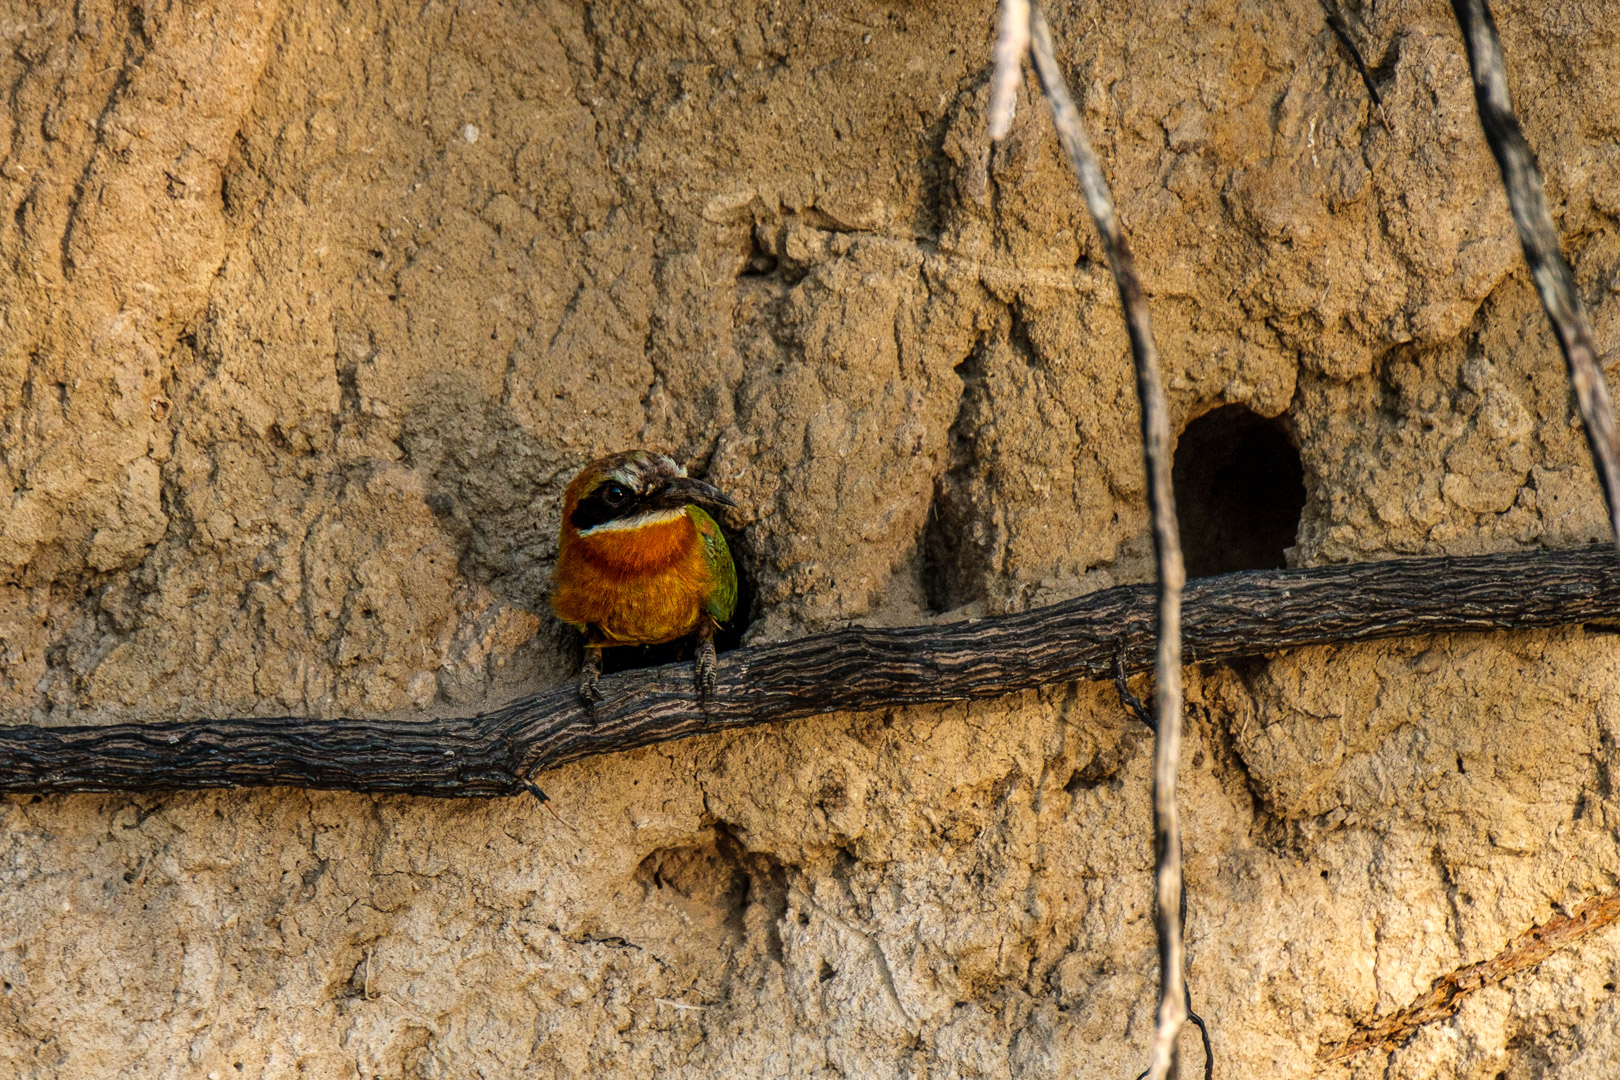 21.9.2019 - Xaro Lodge, Boat Tour - White-fronted Bee-eater